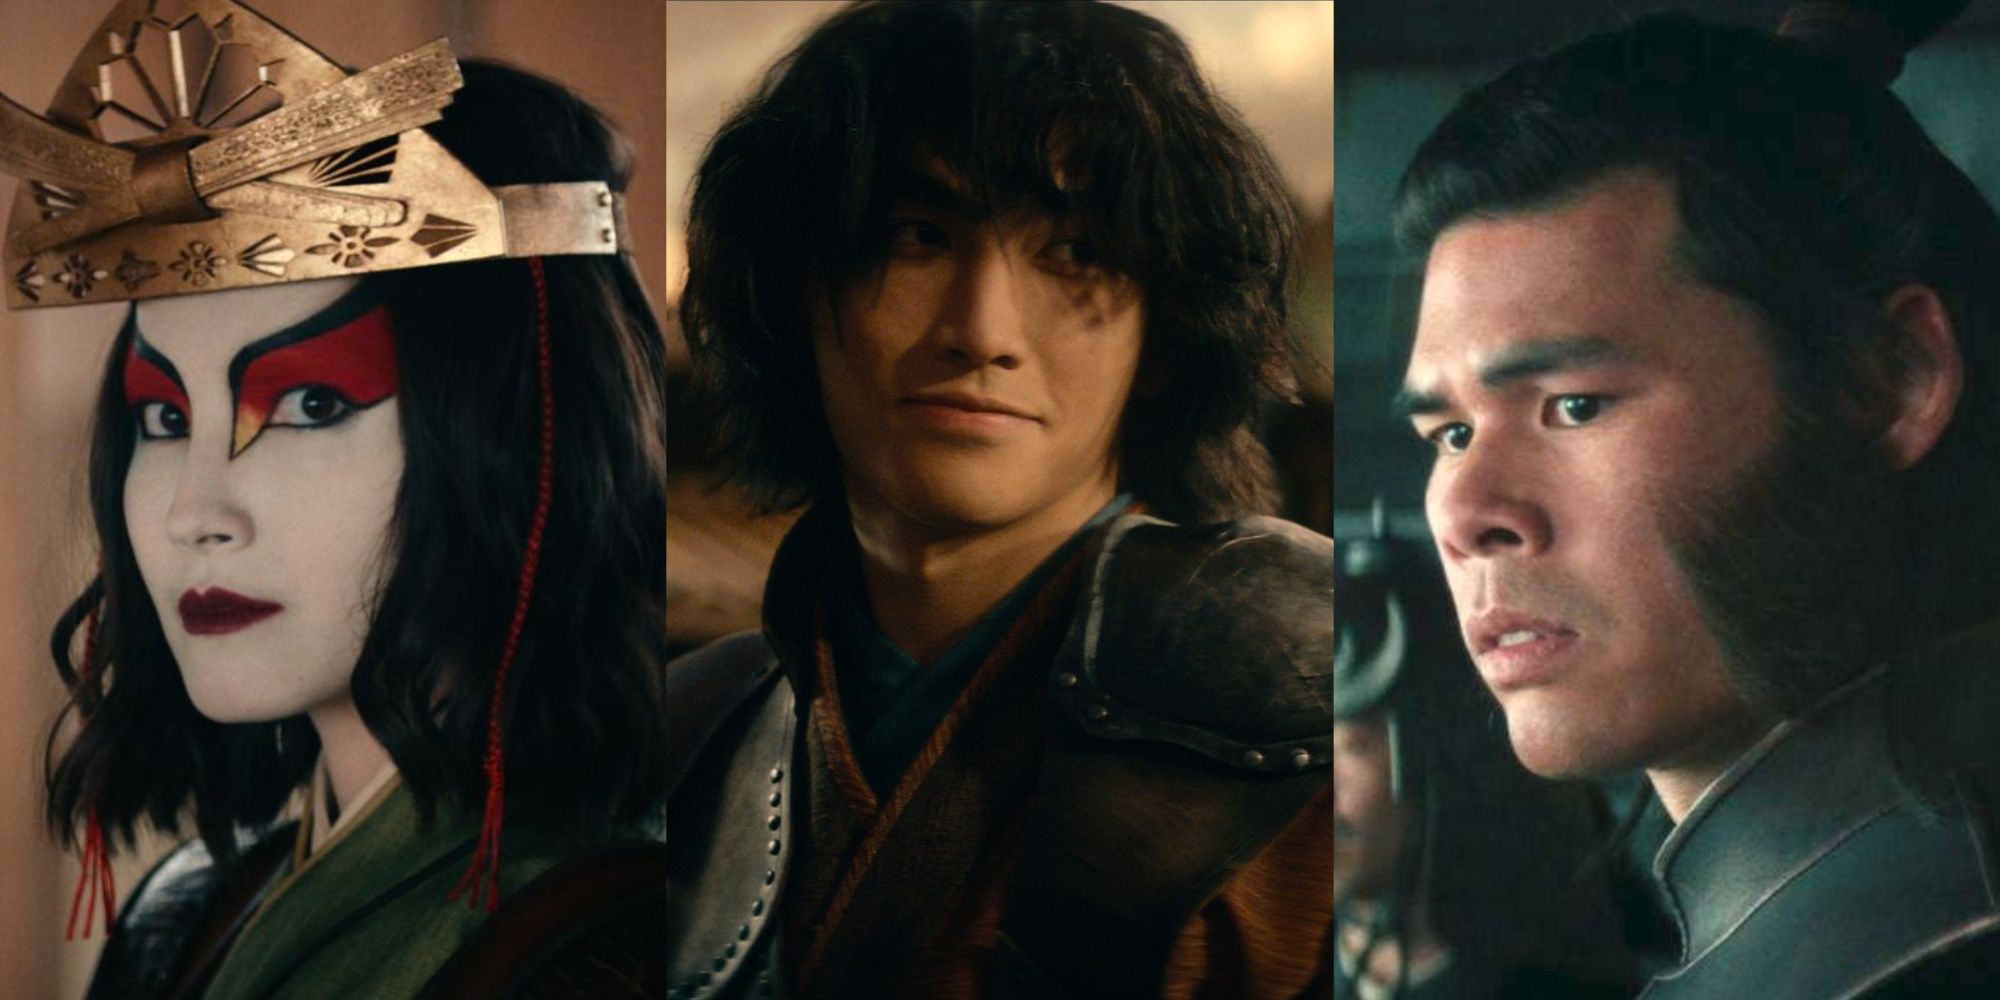 Suki, Jet, and Jee, from Avatar: The Last Aibender Live Action Series